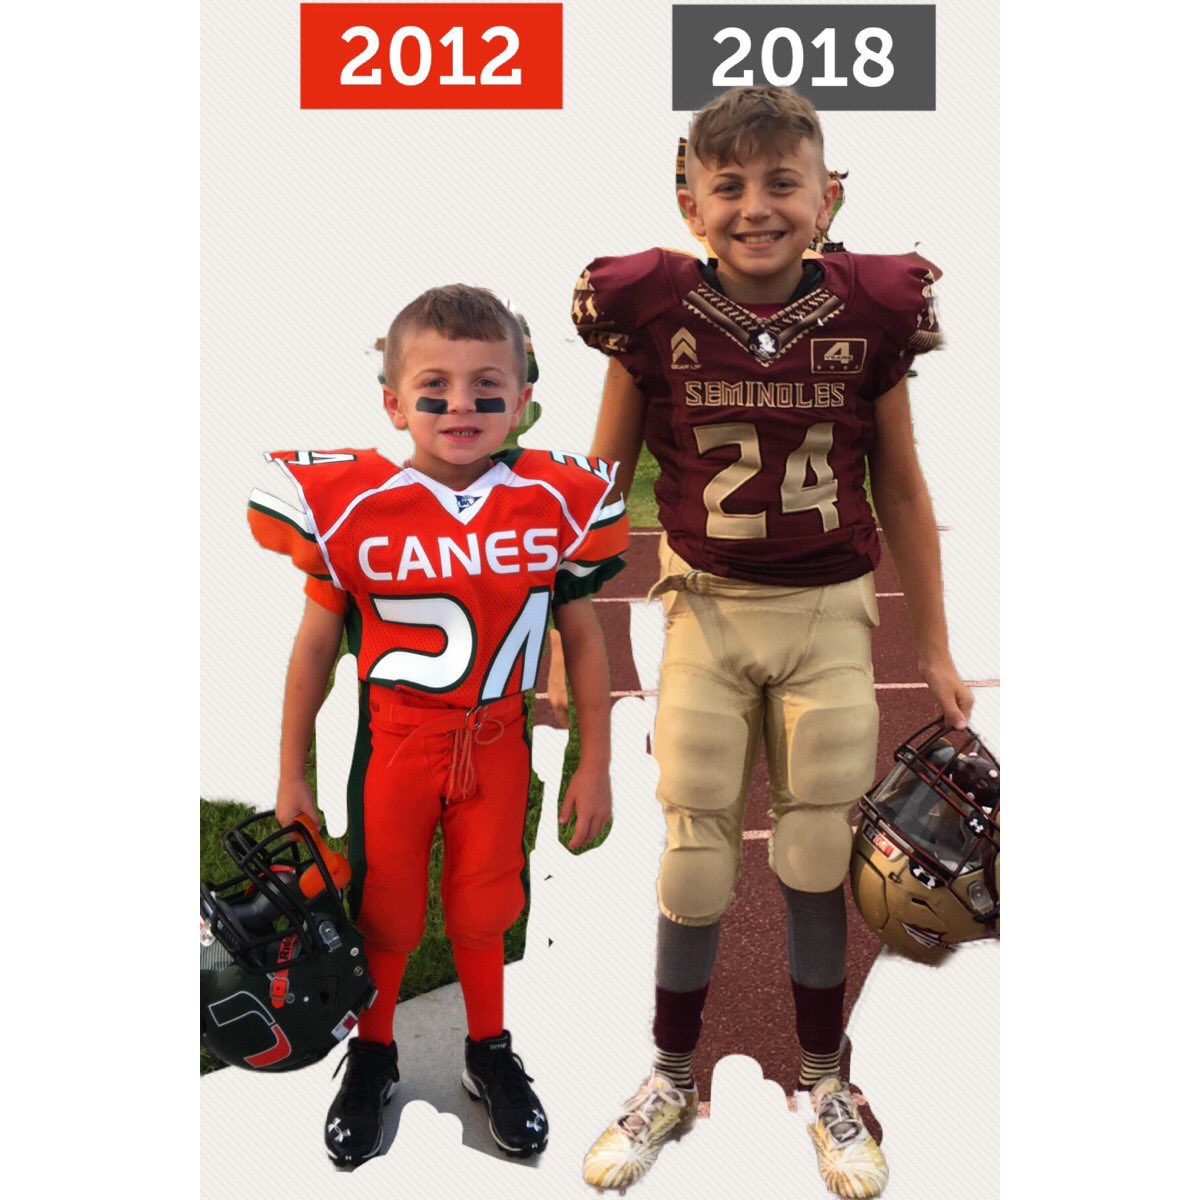 First day of first football season to the first day of his last football season. Elvis is #24 on the field and #1 in my heart. #noles18 #deerparknoles #seminole #seniorfootball